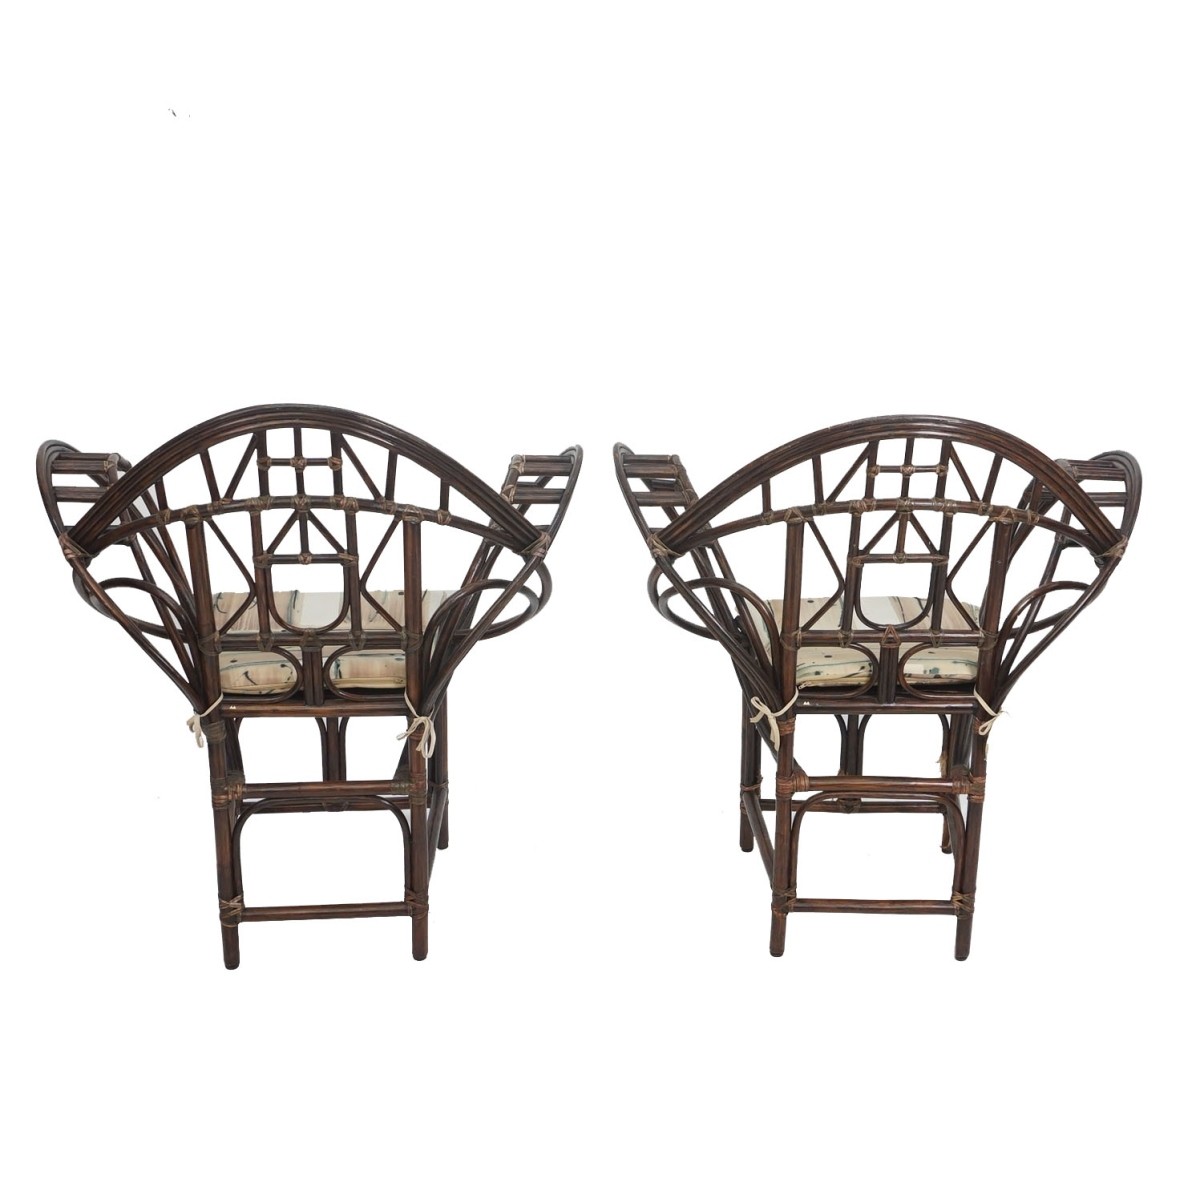 Two McGuire Butterfly Chairs